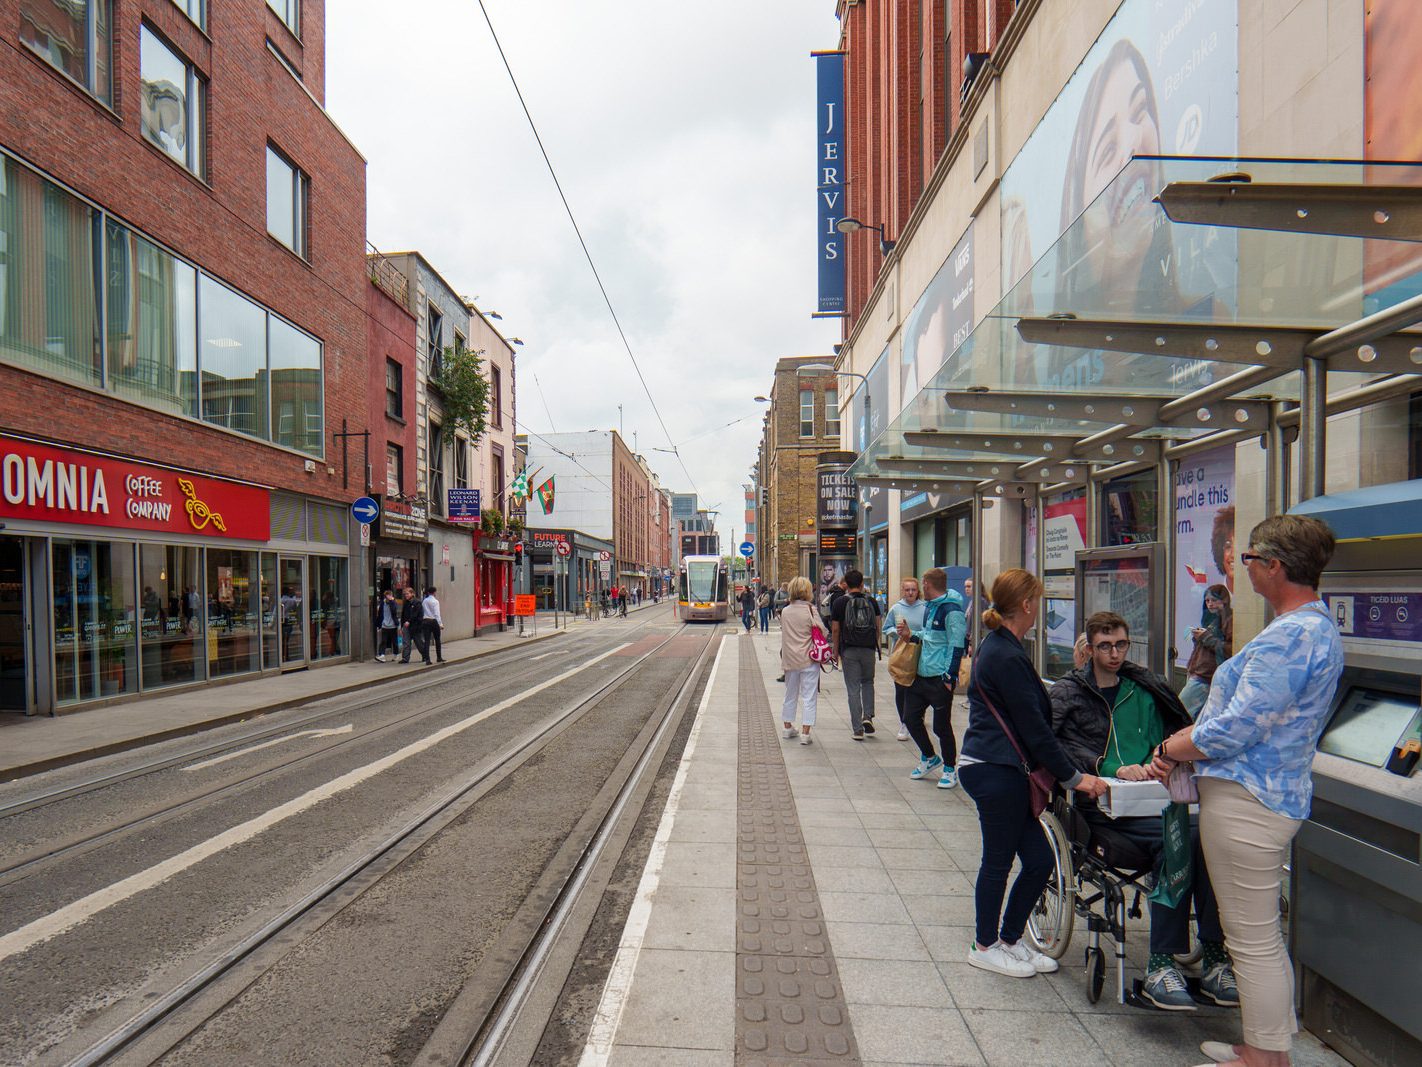 THE LUAS TRAM STOP [KNOWN AS JERVIS EVEN THOUGH IT IS ON UPPER ABBEY STREET] 001